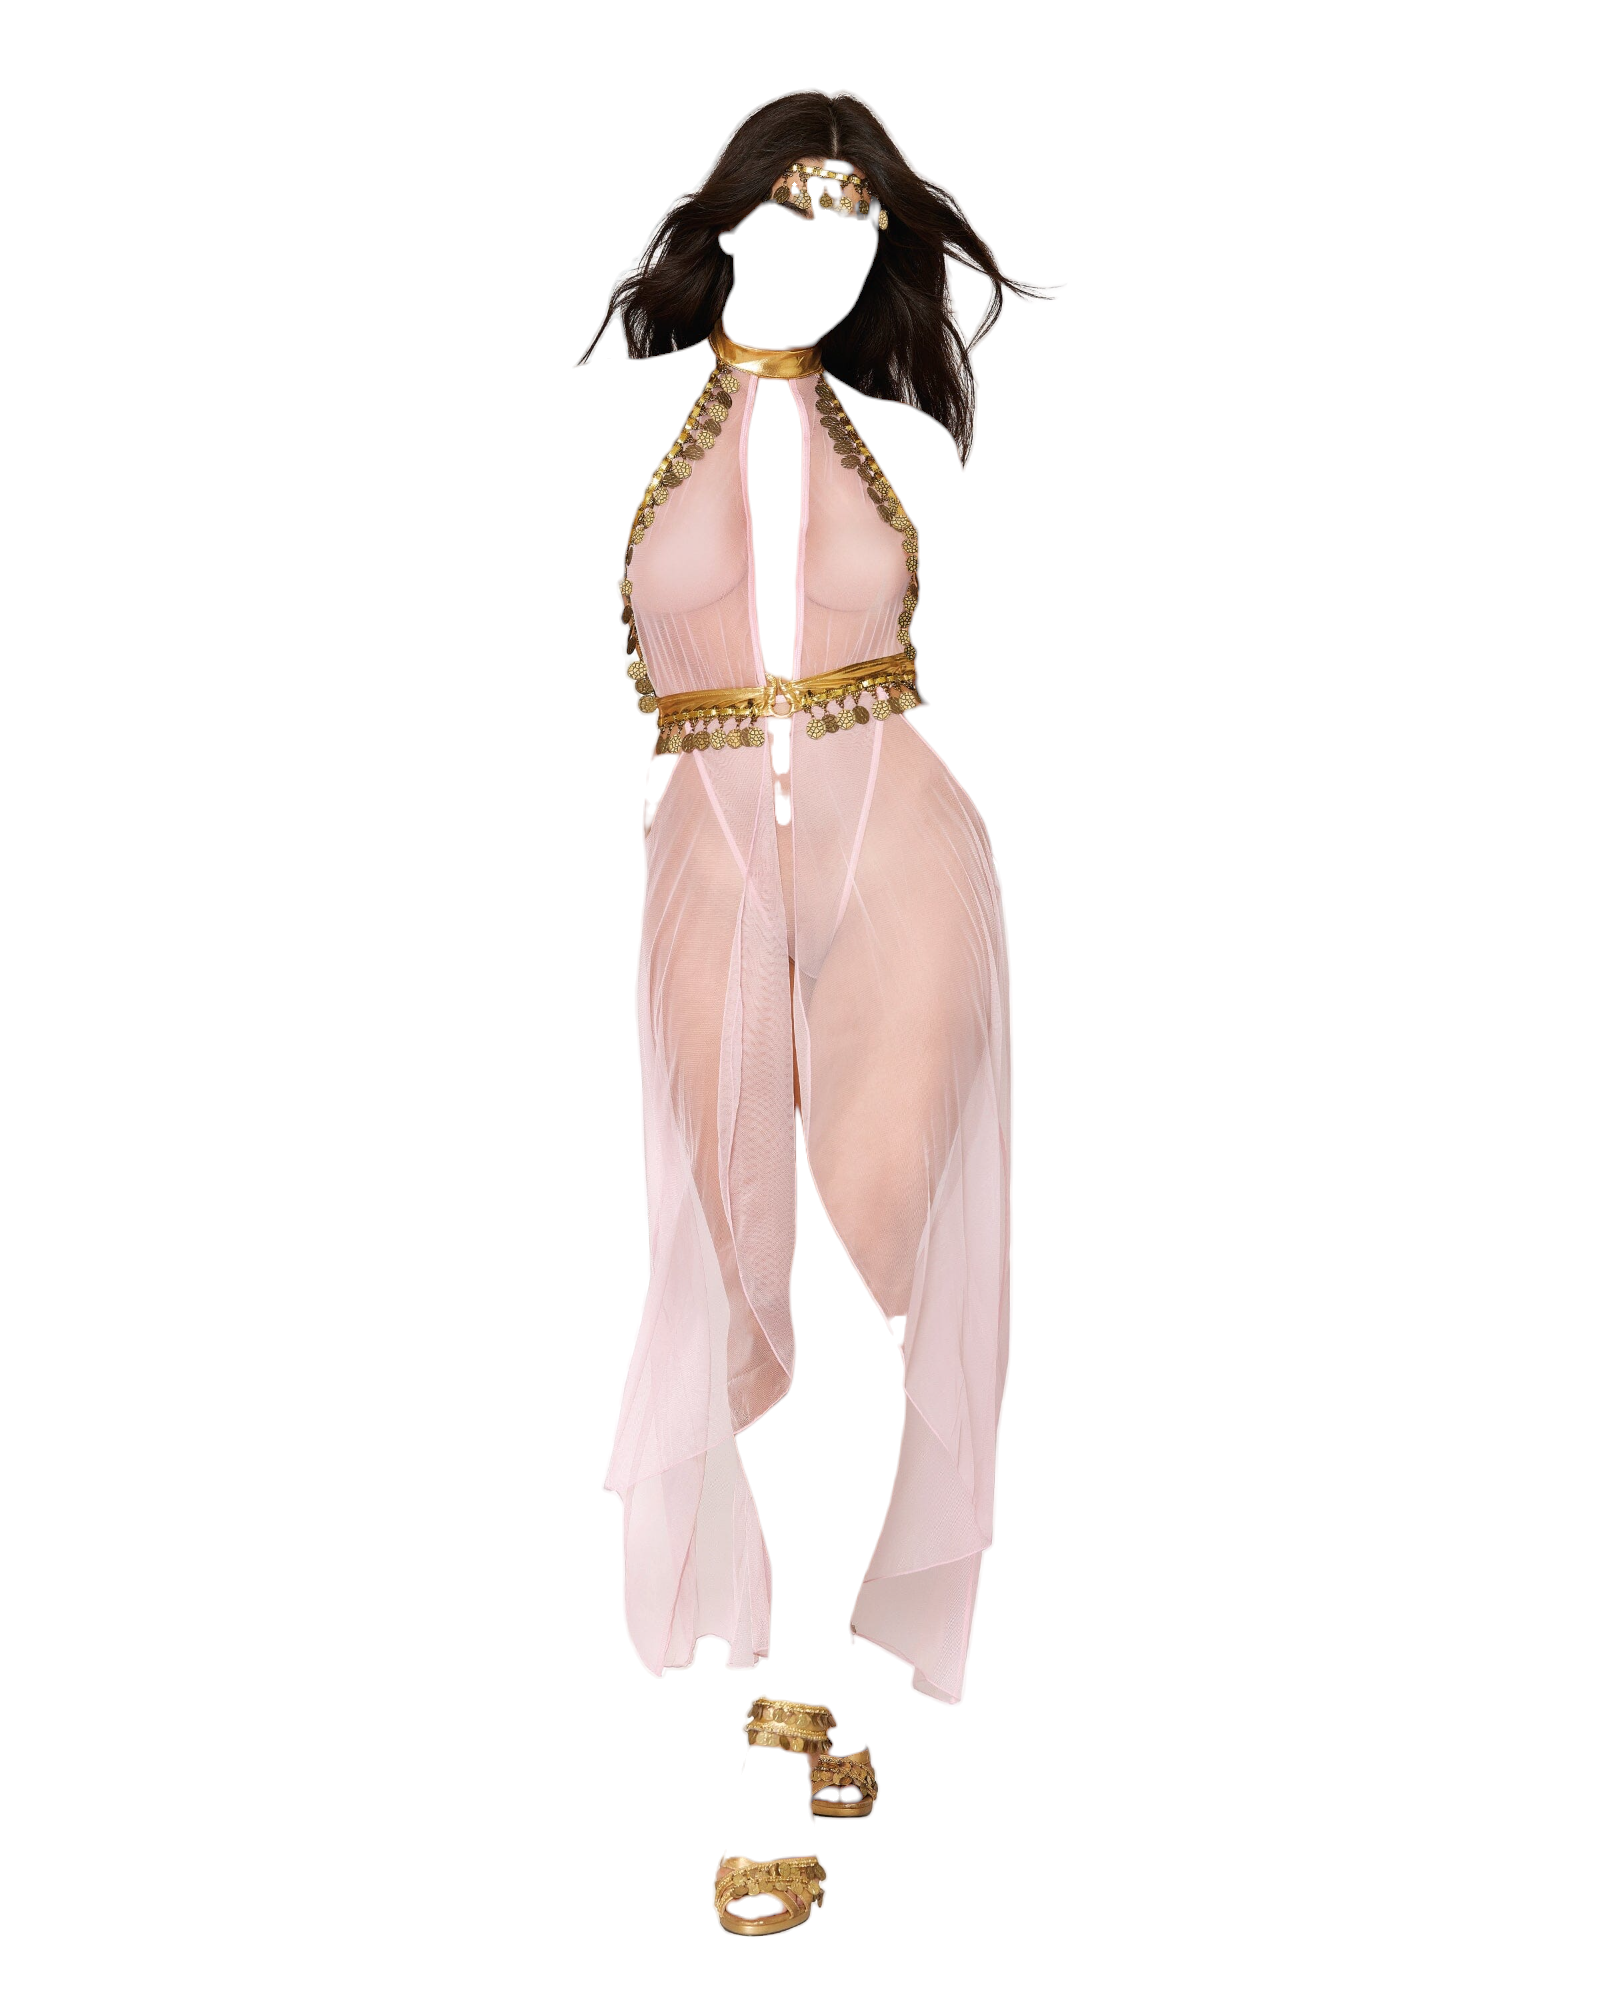 Dreamgirl Snake Charmer Costume Open Long Skirt Mesh Teddy With Gold Disc Accents Pink